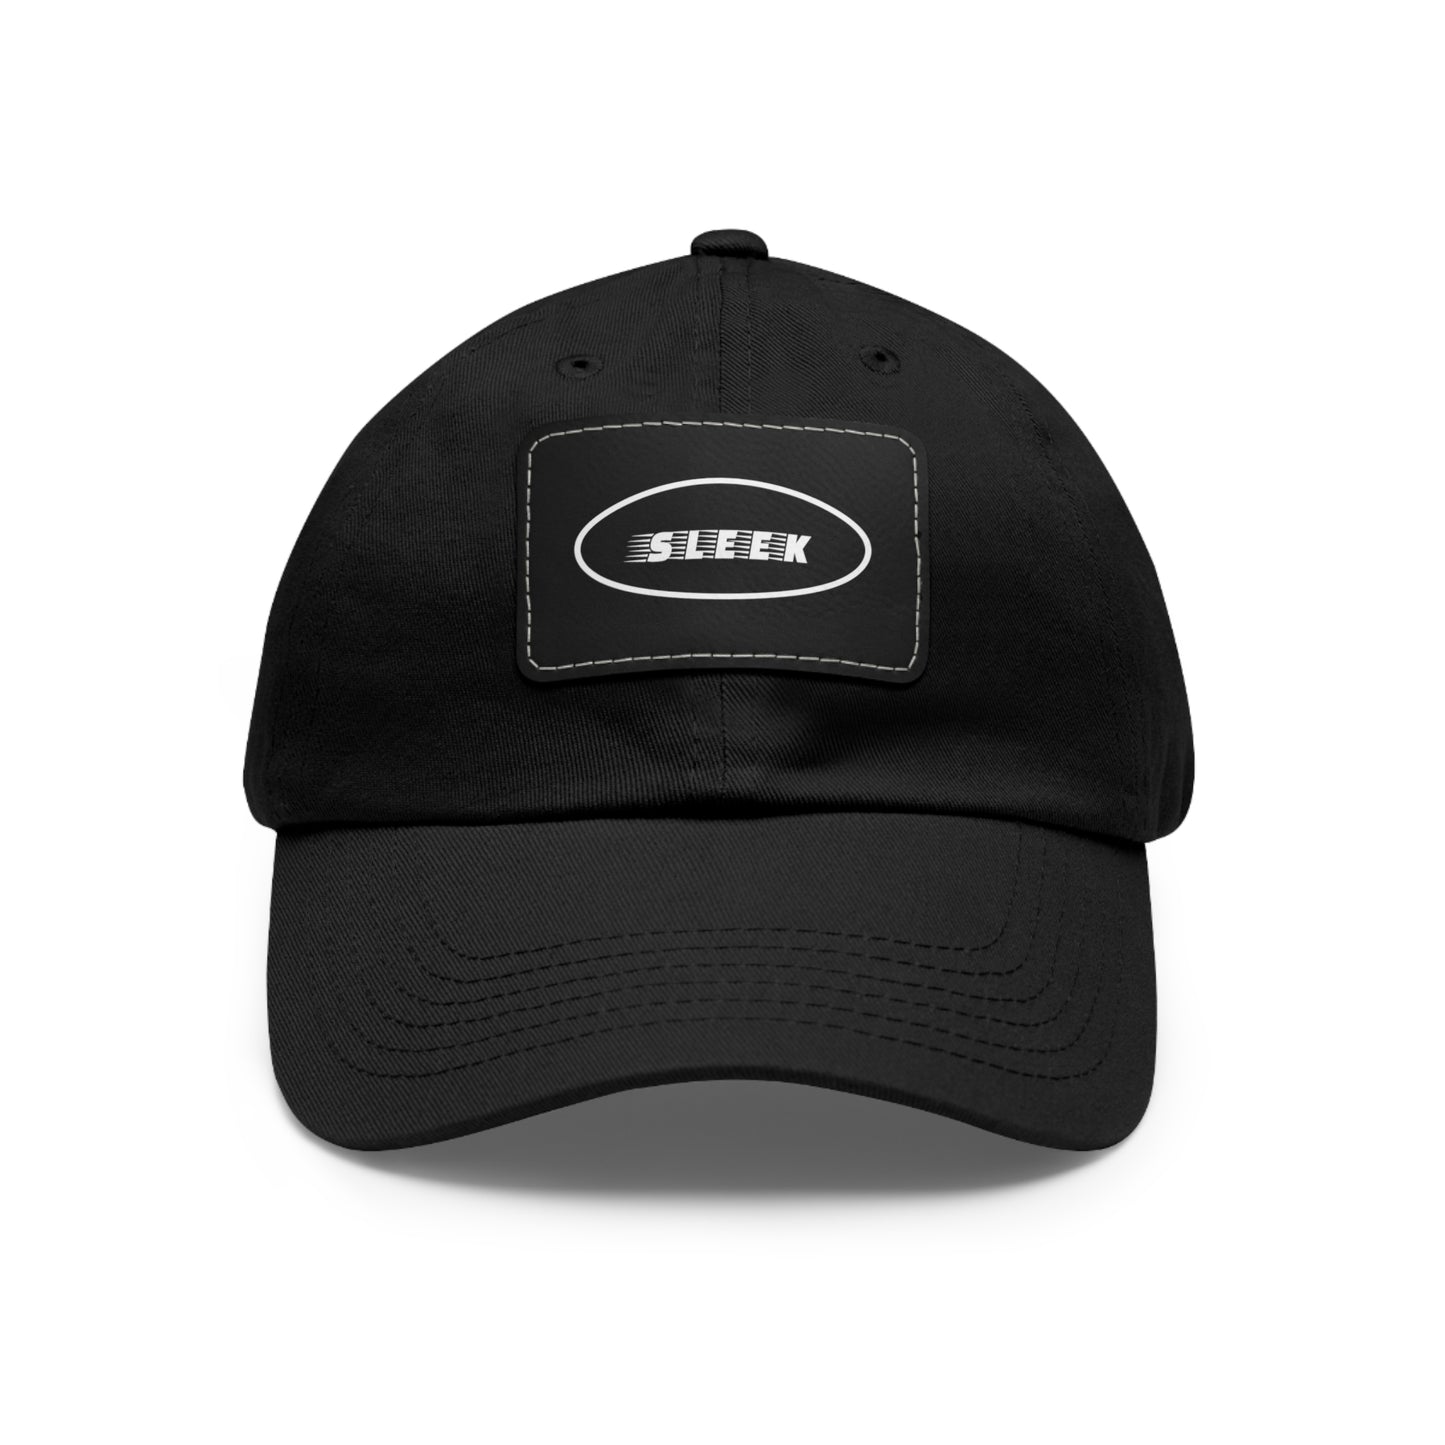 Sleek Black Dad Hat with Leather Patch